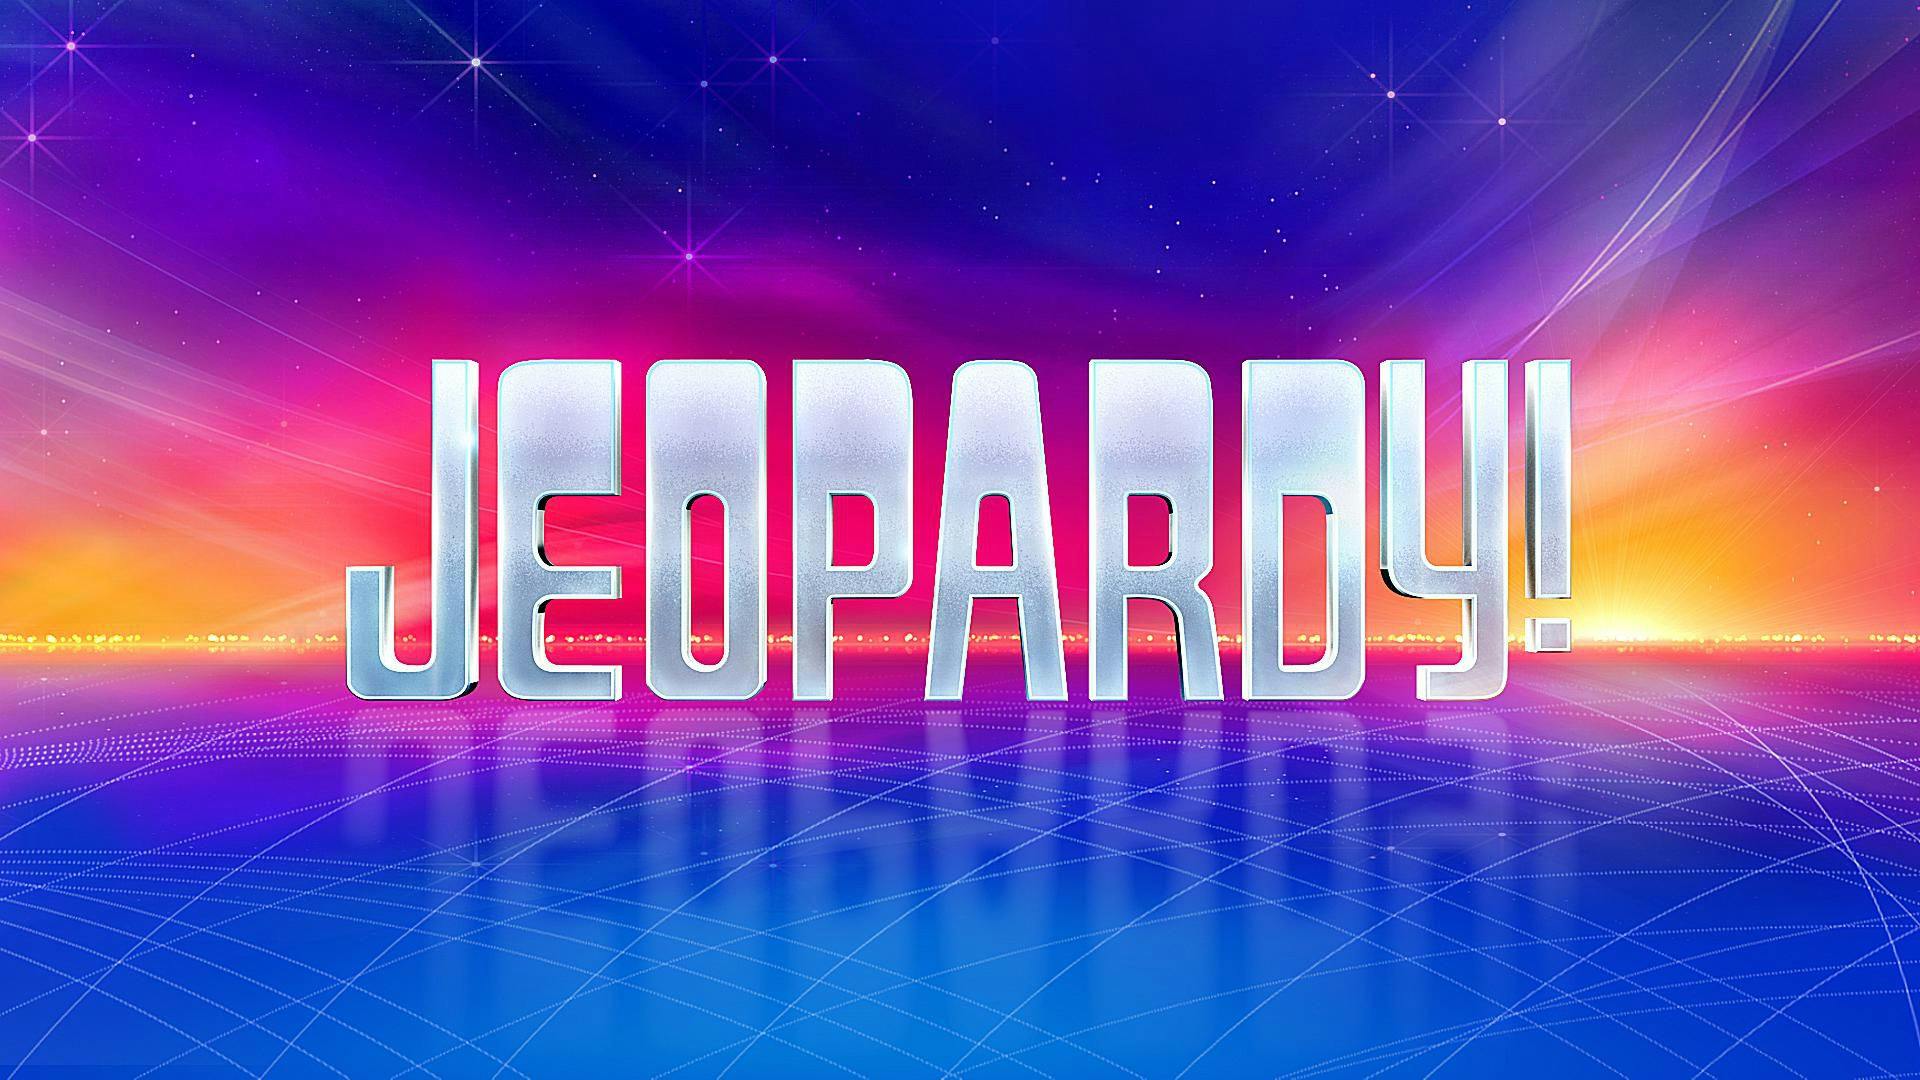 Make Your Own Online Jeopardy Game Make Your Own Jeopardy Game